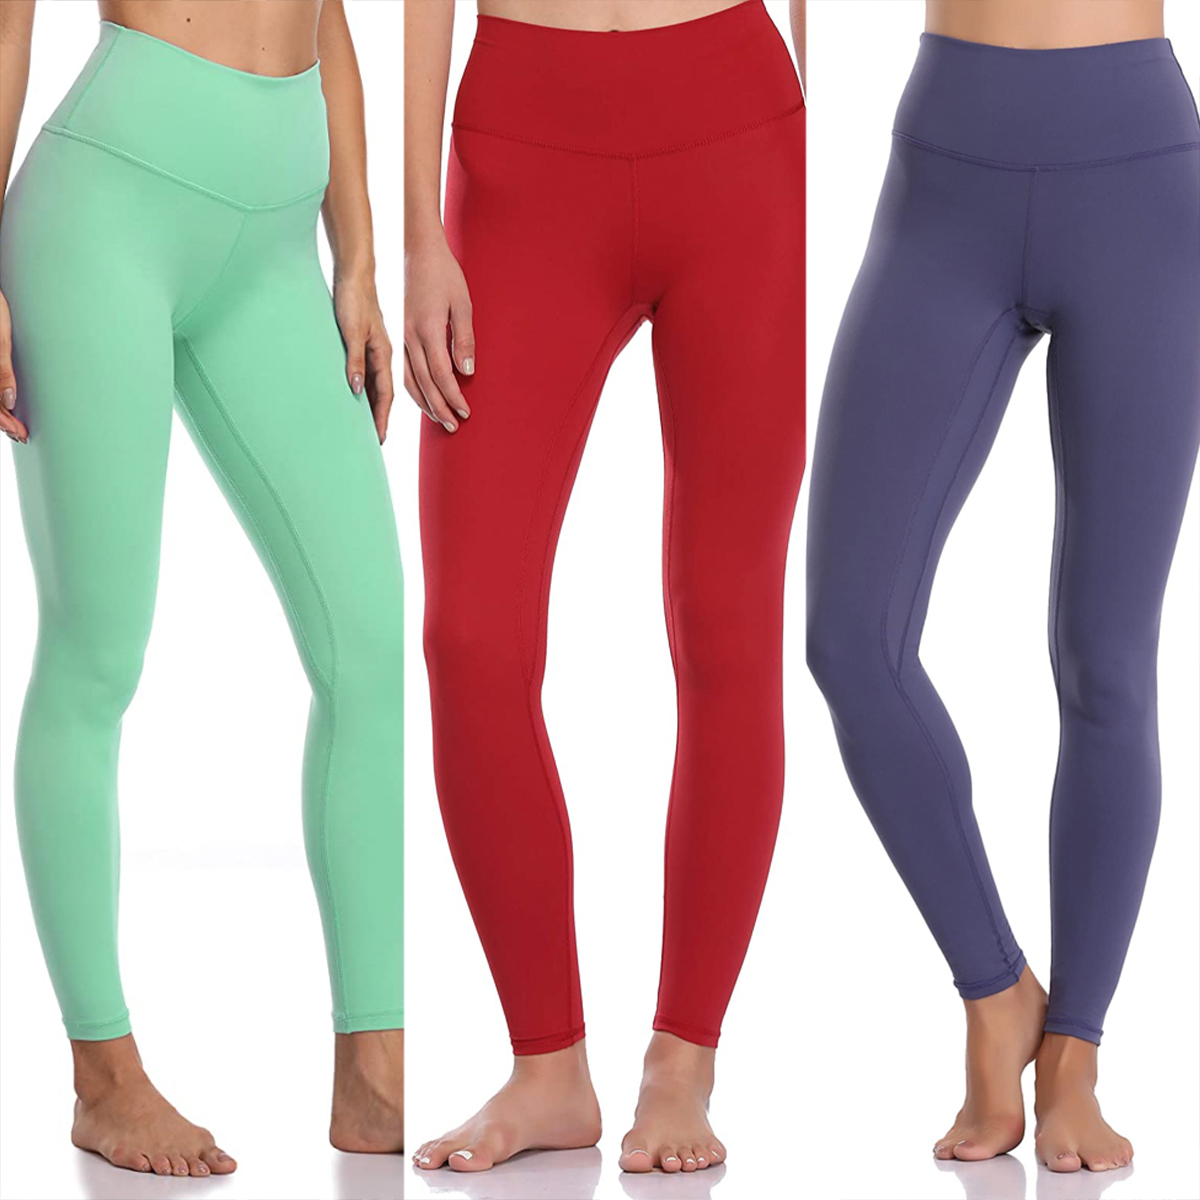 The £23 Lululemon leggings dupe that have the 'squat test